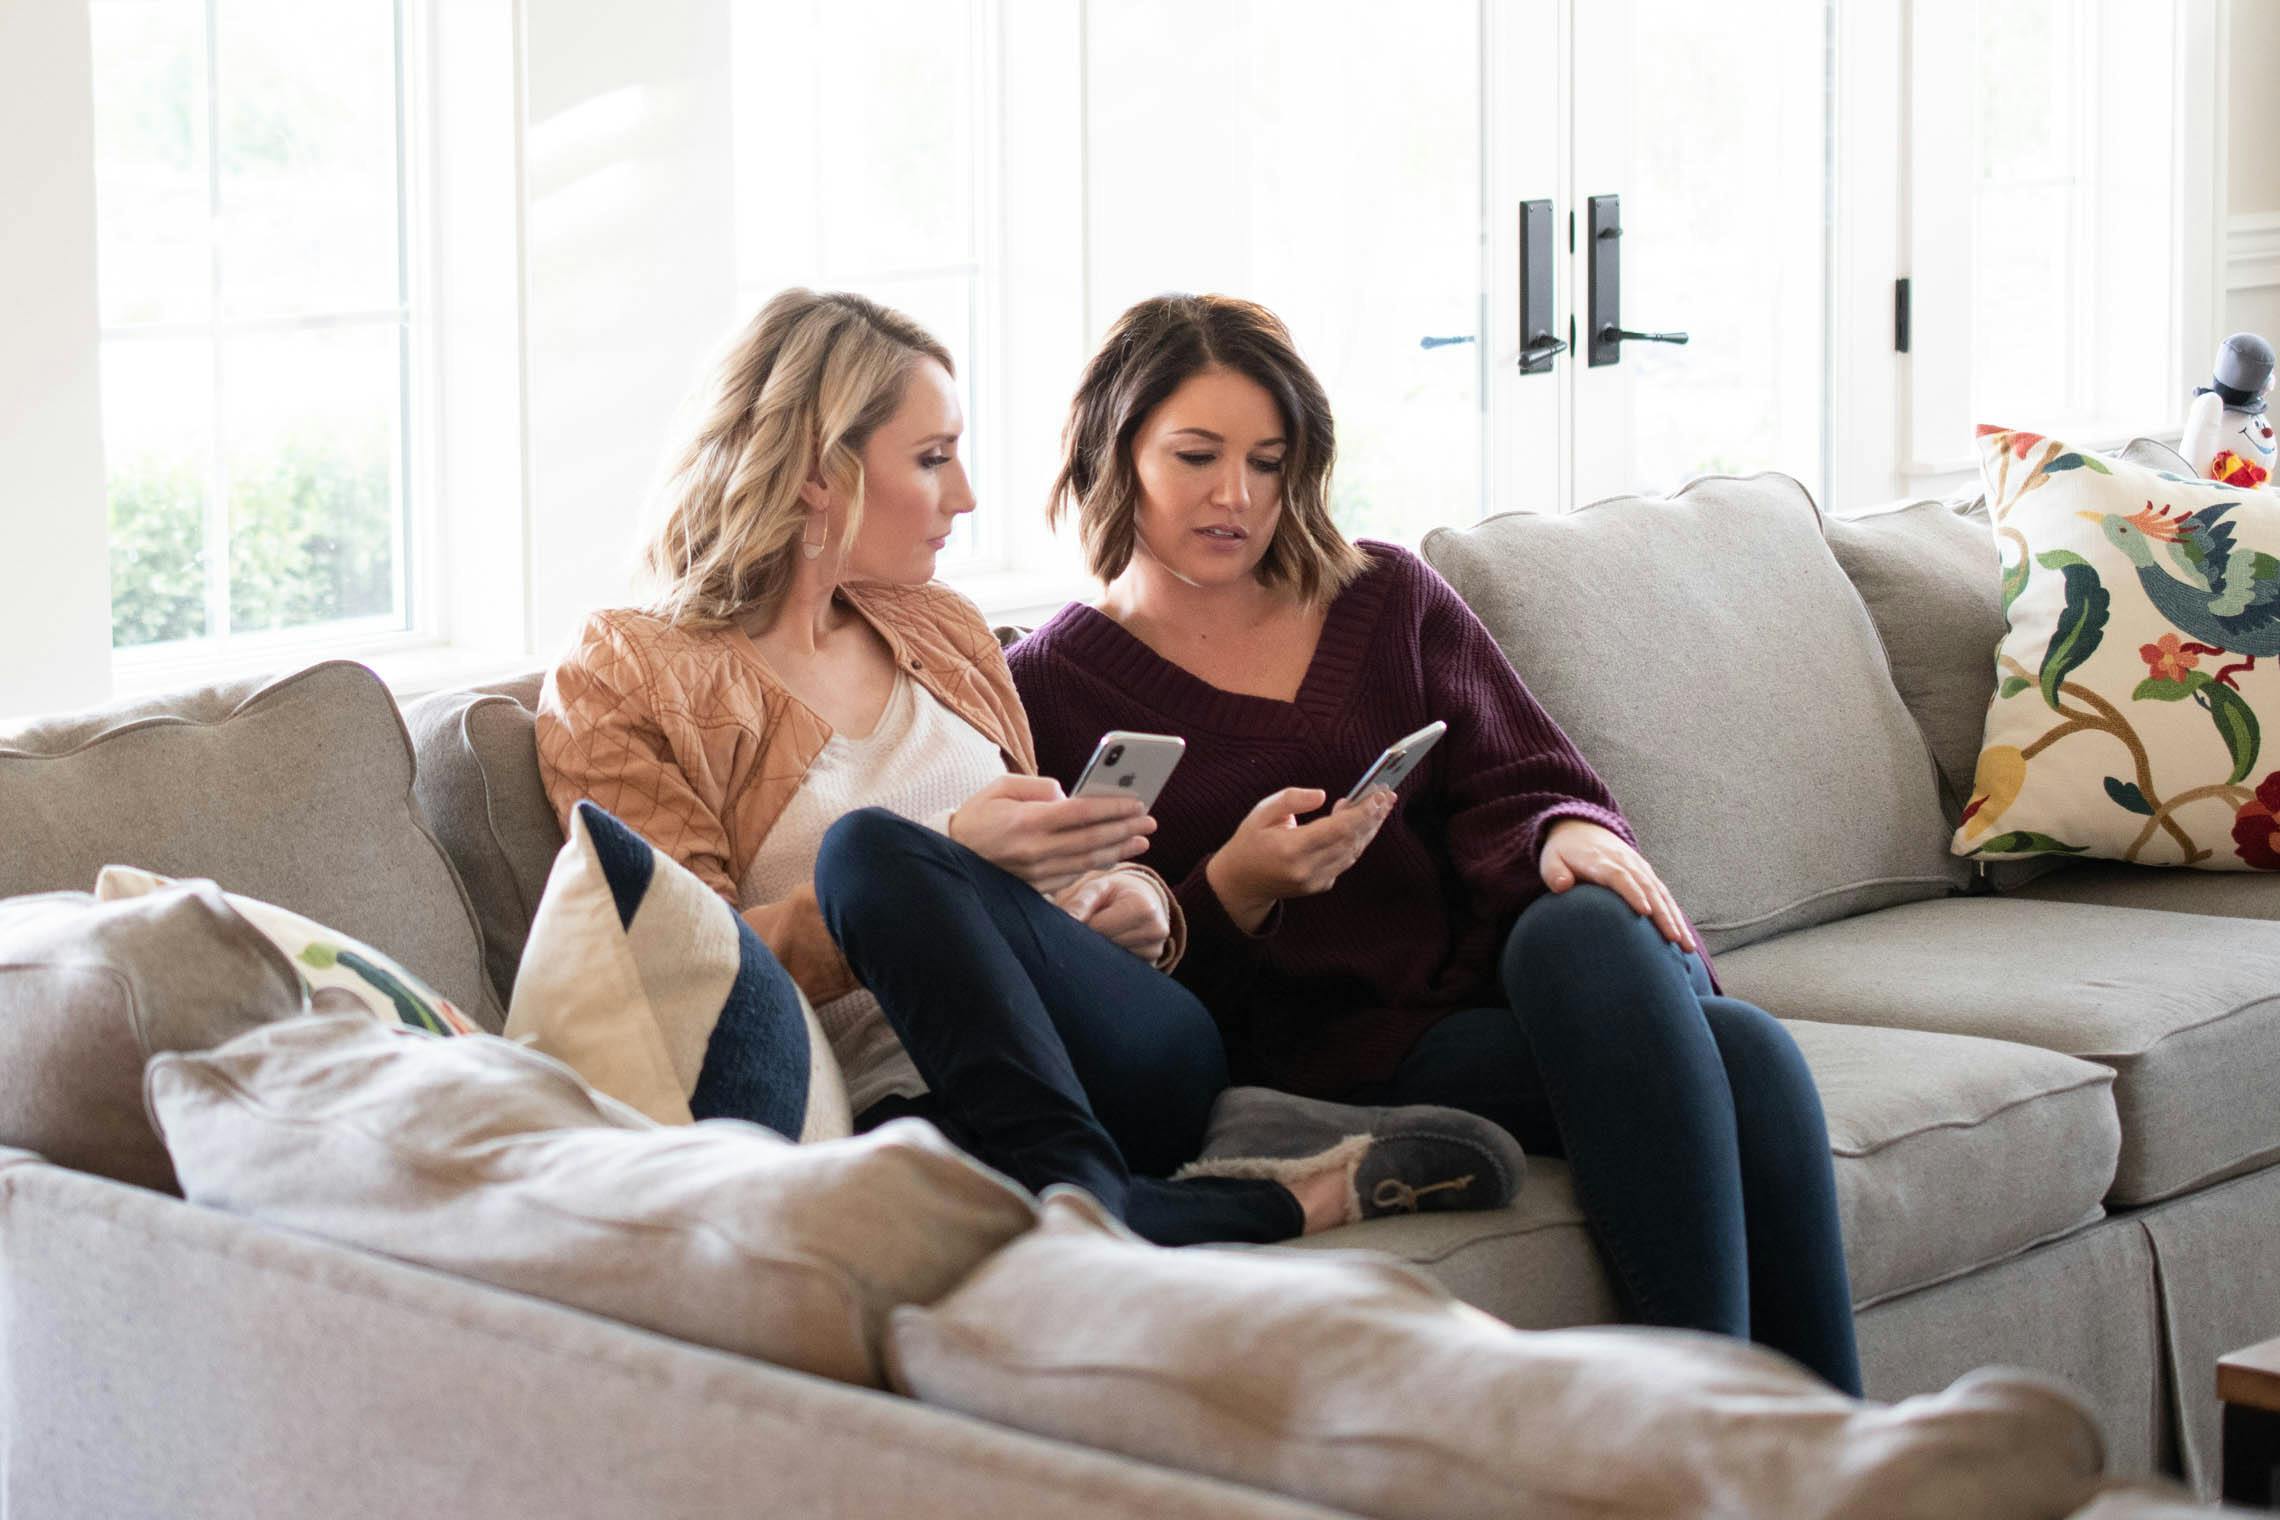 Two women sitting next to each other on a sofa while looking at their cell phones.